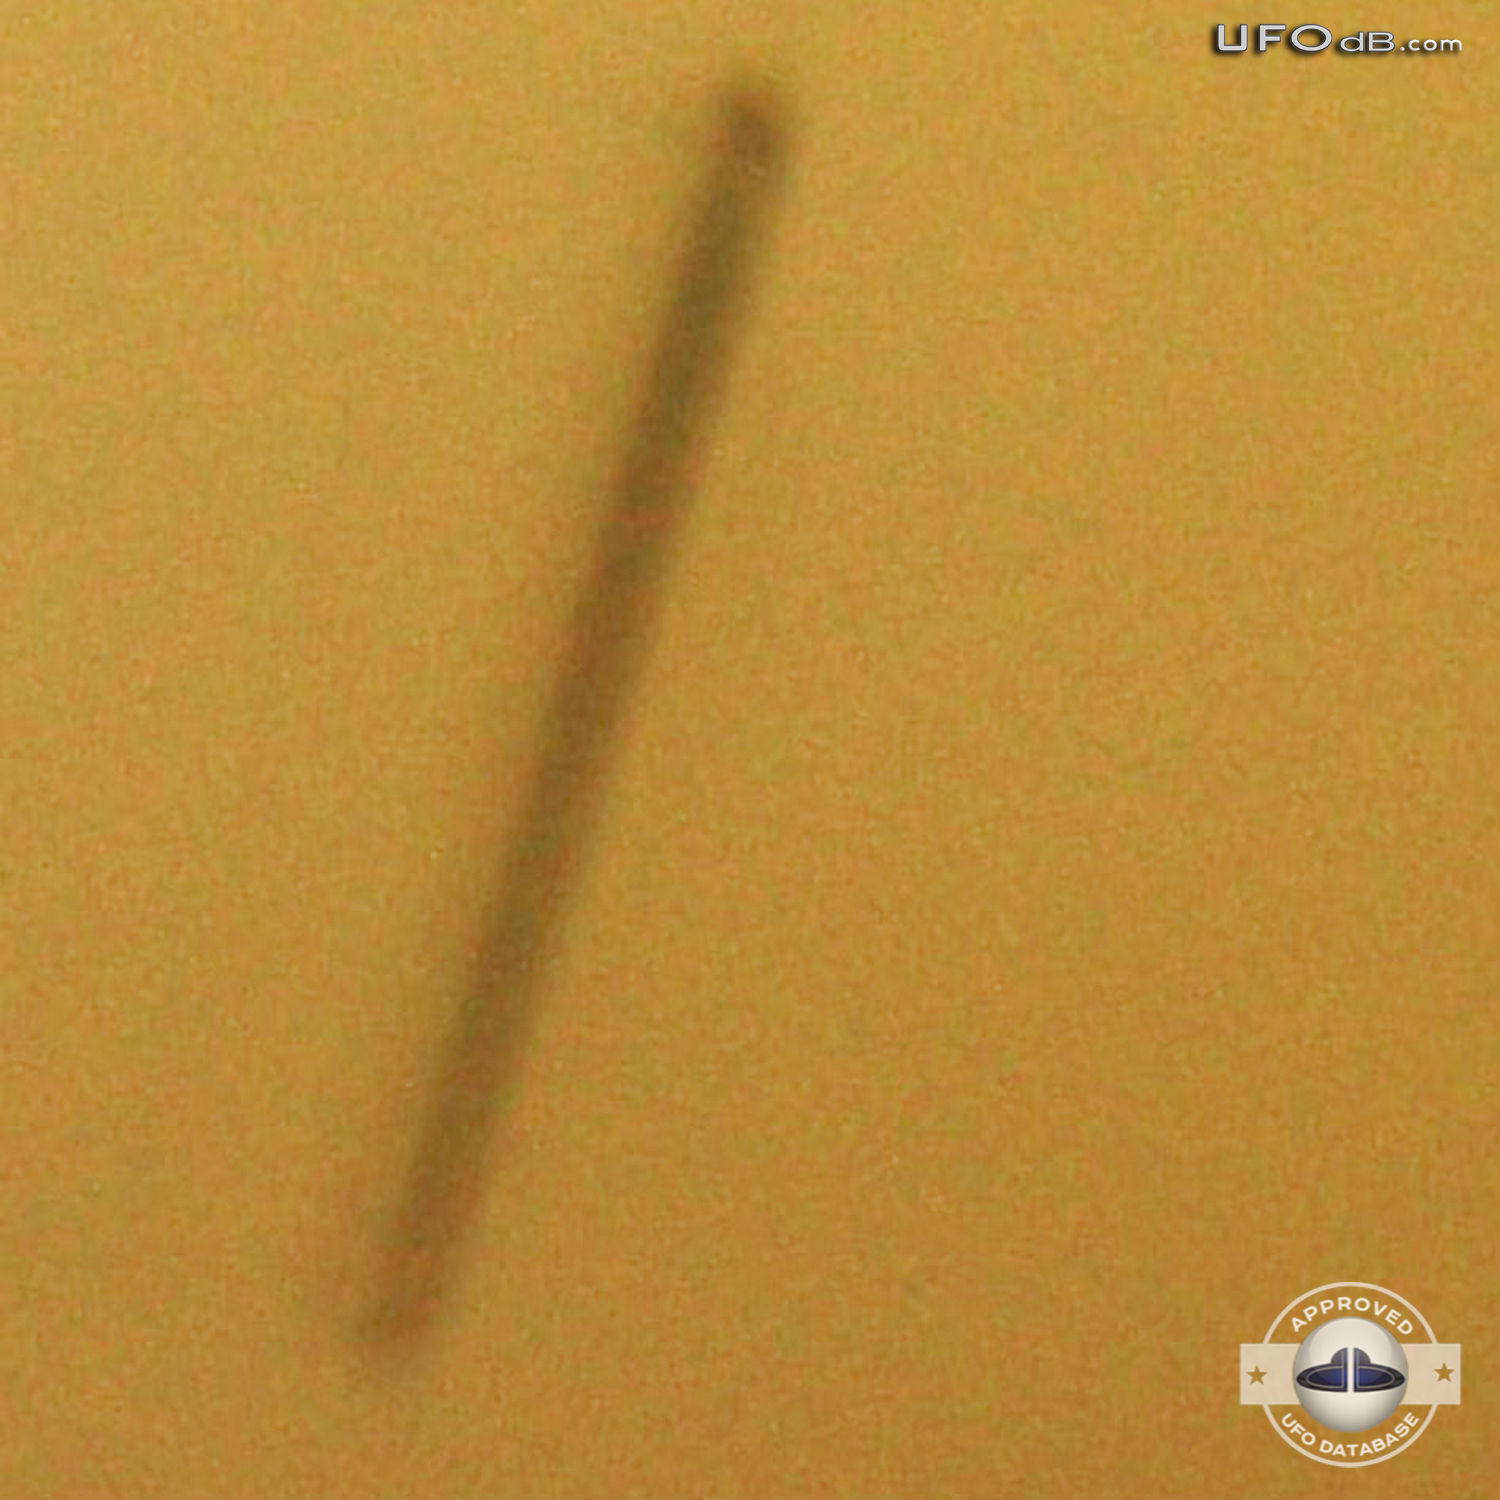 White line with UFO near Dog Island in Florida | USA | March 15 2011 UFO Picture #288-3